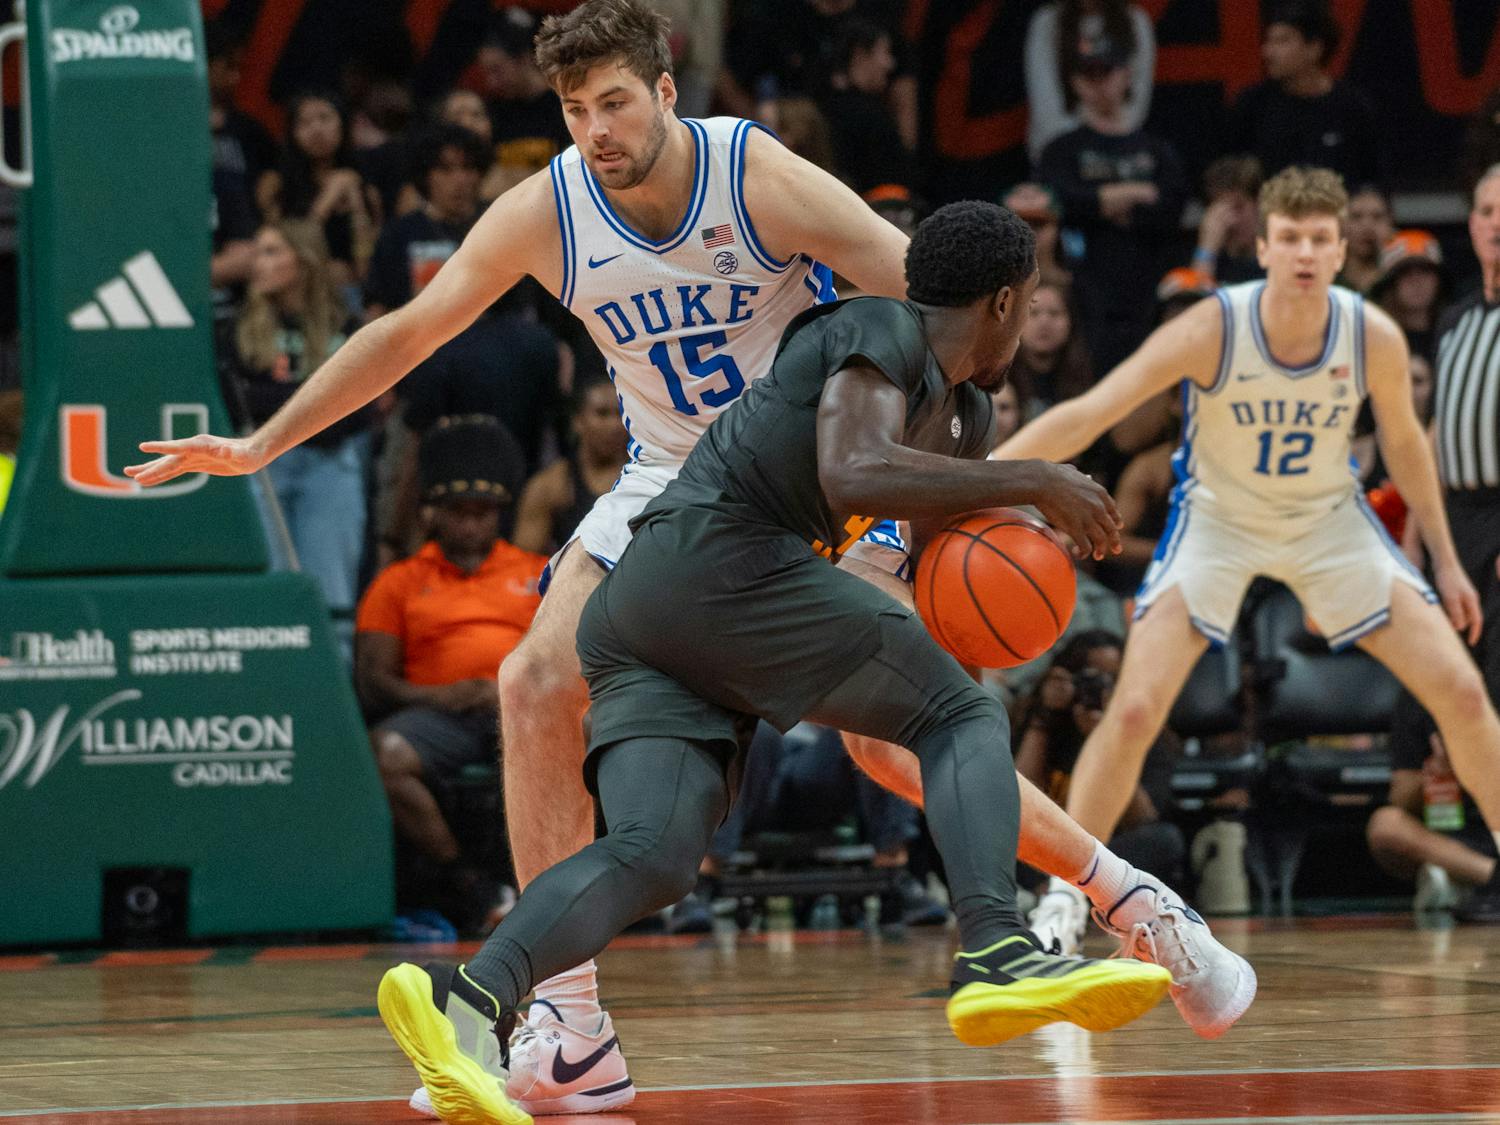 Graduate center Ryan Young plays defense in Duke's game against Miami.